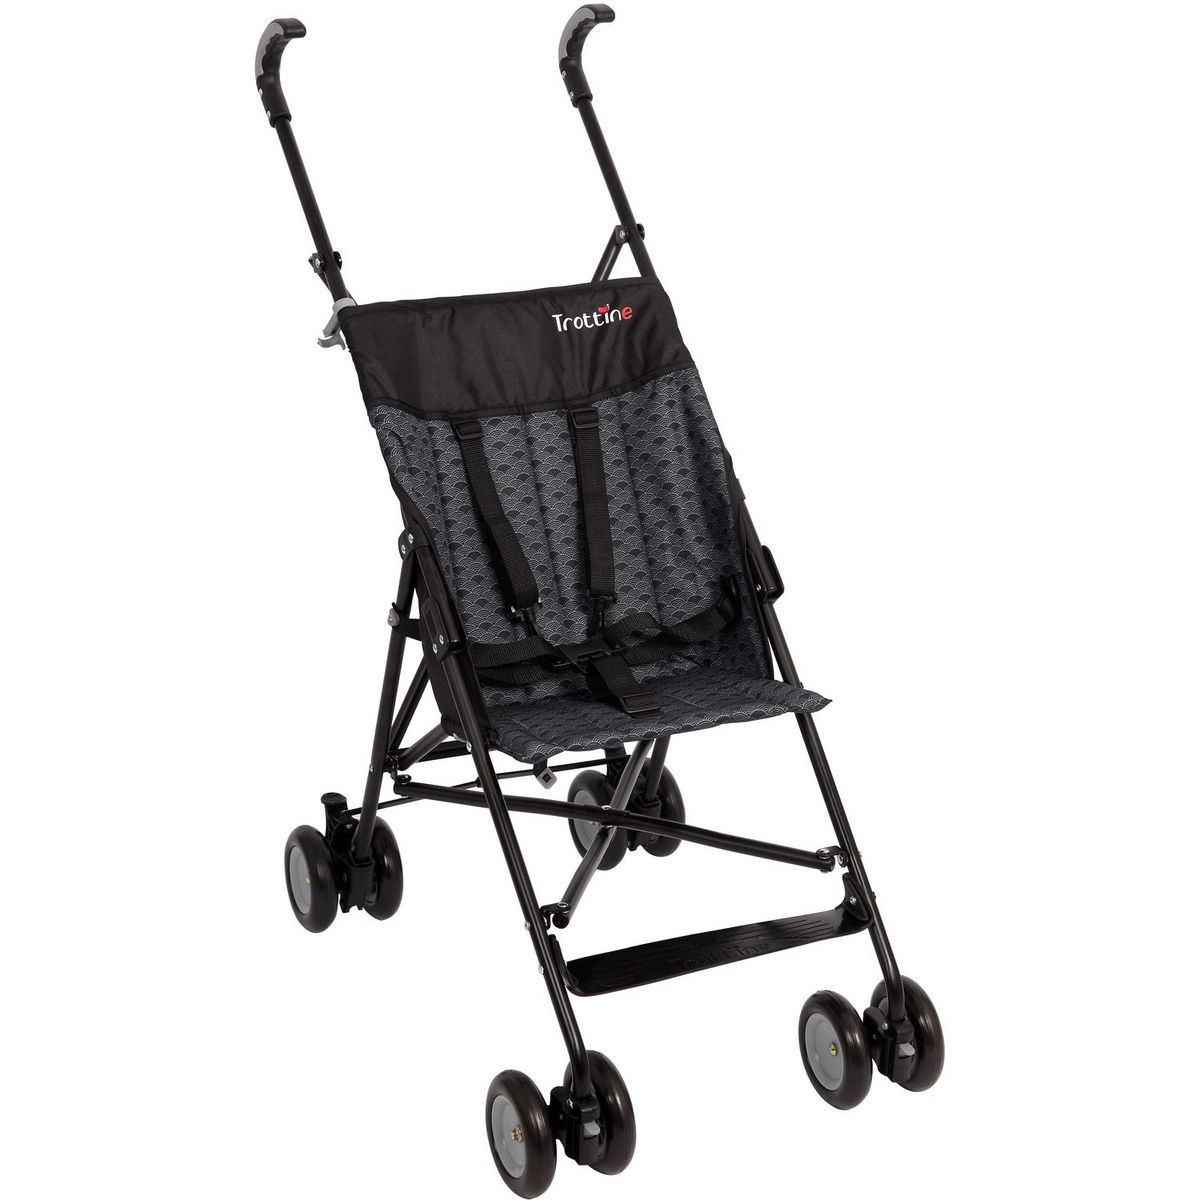 TROTTINE poussette canne fixe - Cantor